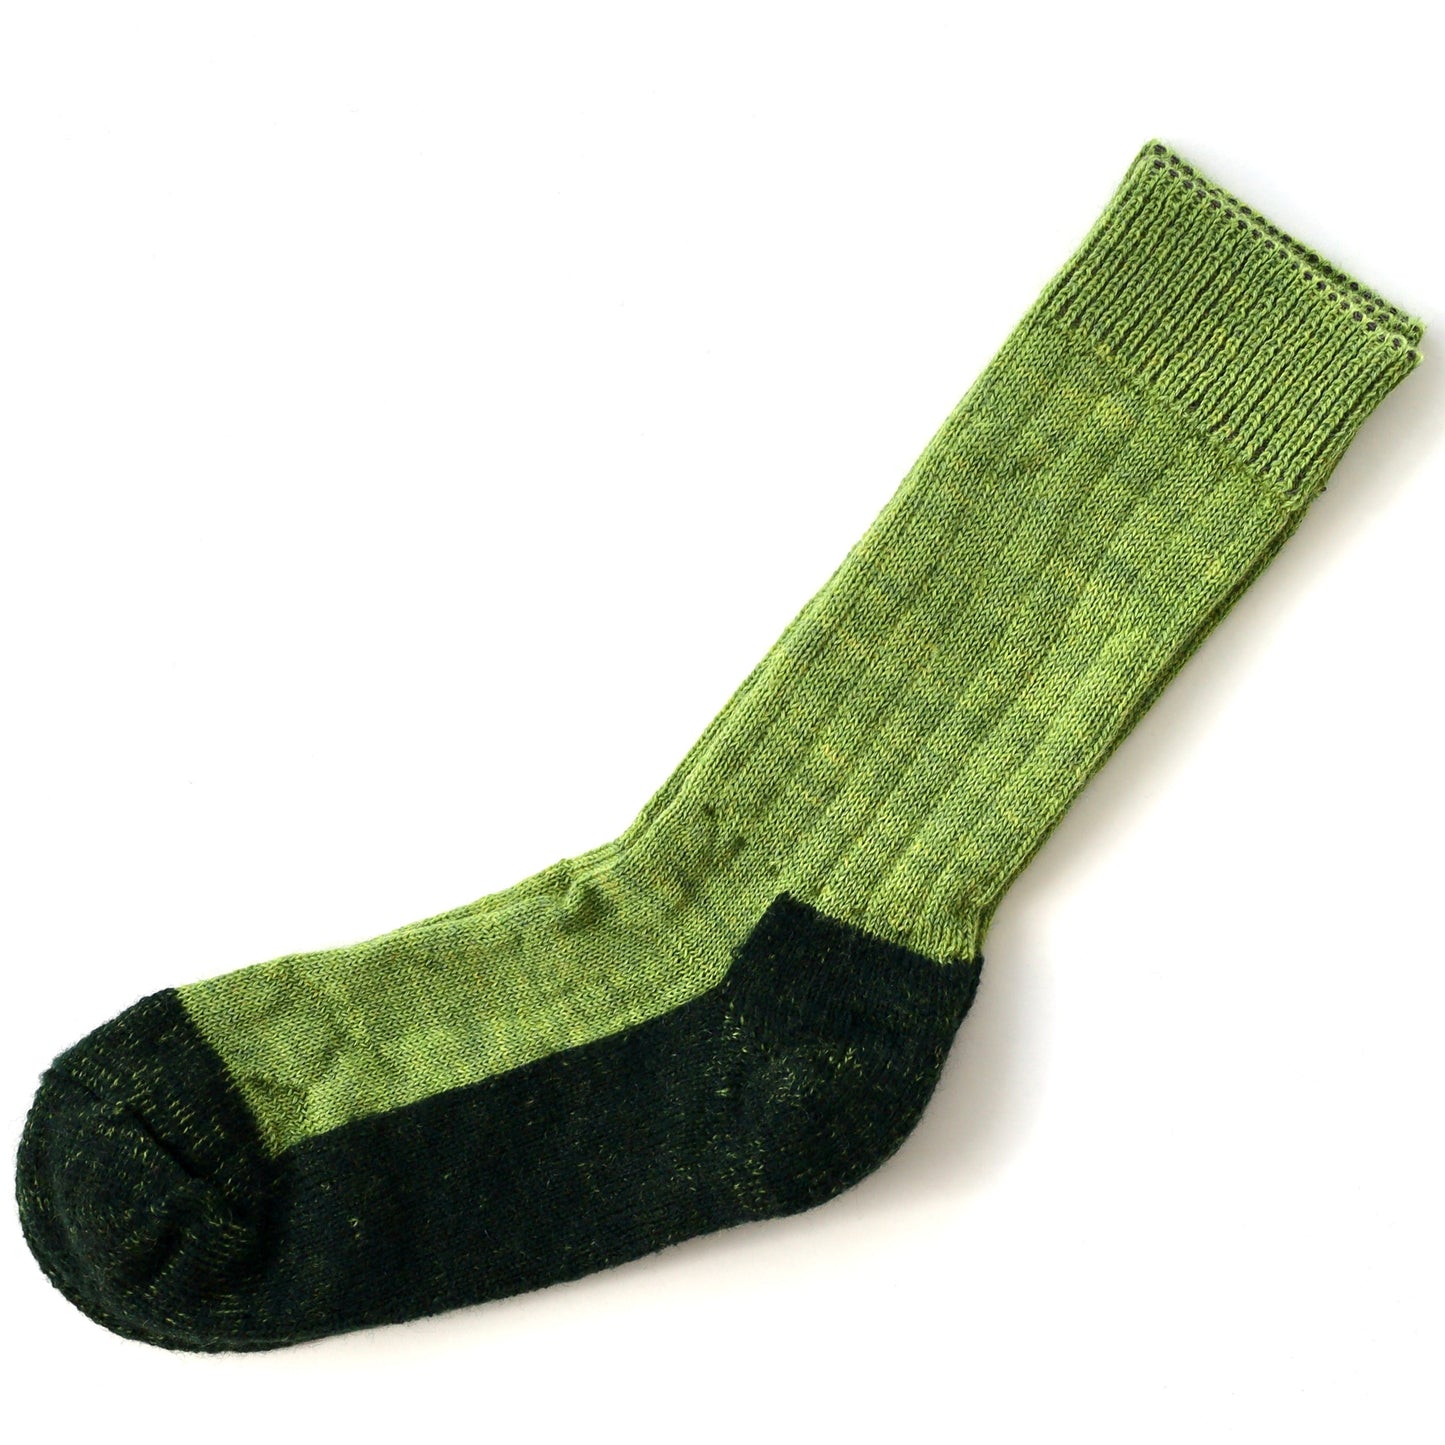 Hirsch Natur - 100% Organic Virgin Wool Socks with Grippers, Sizes 6-11.5  for Men and Women